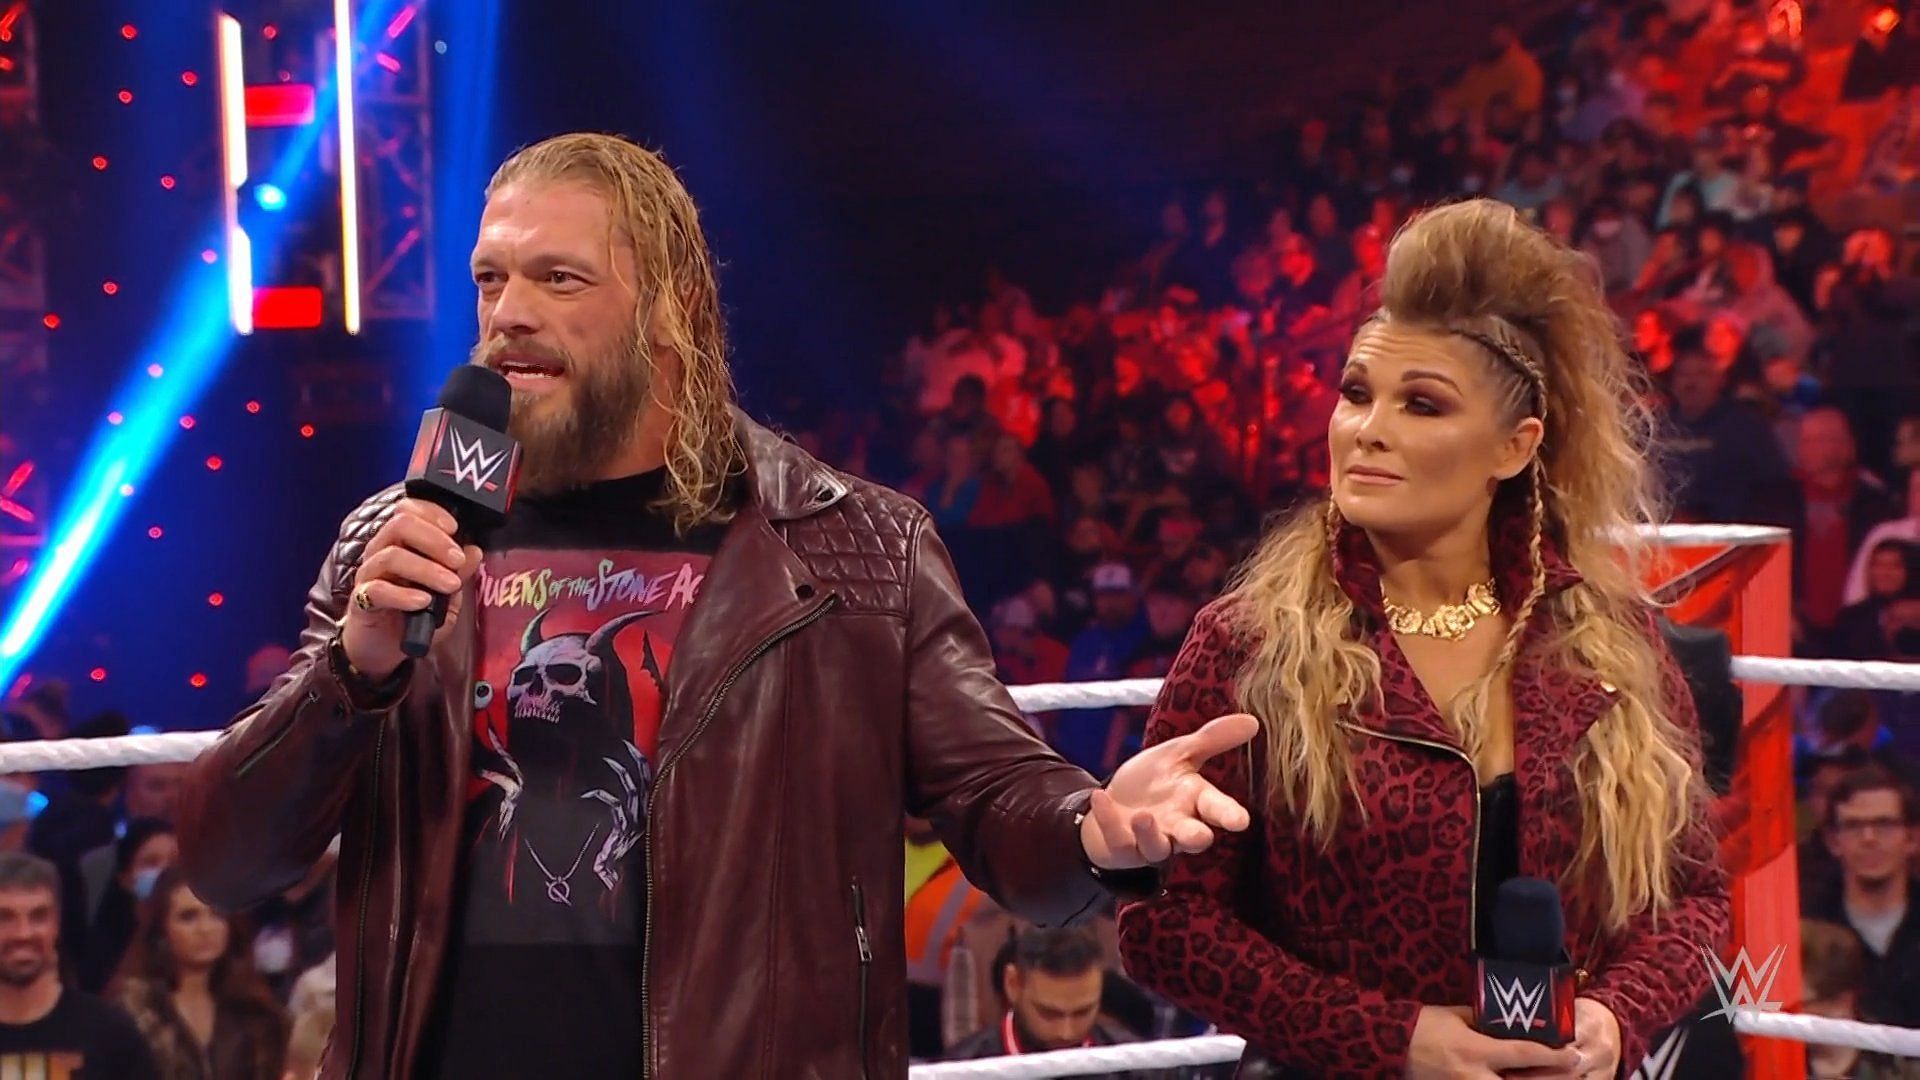 Edge and Beth Phoenix are one of WWE